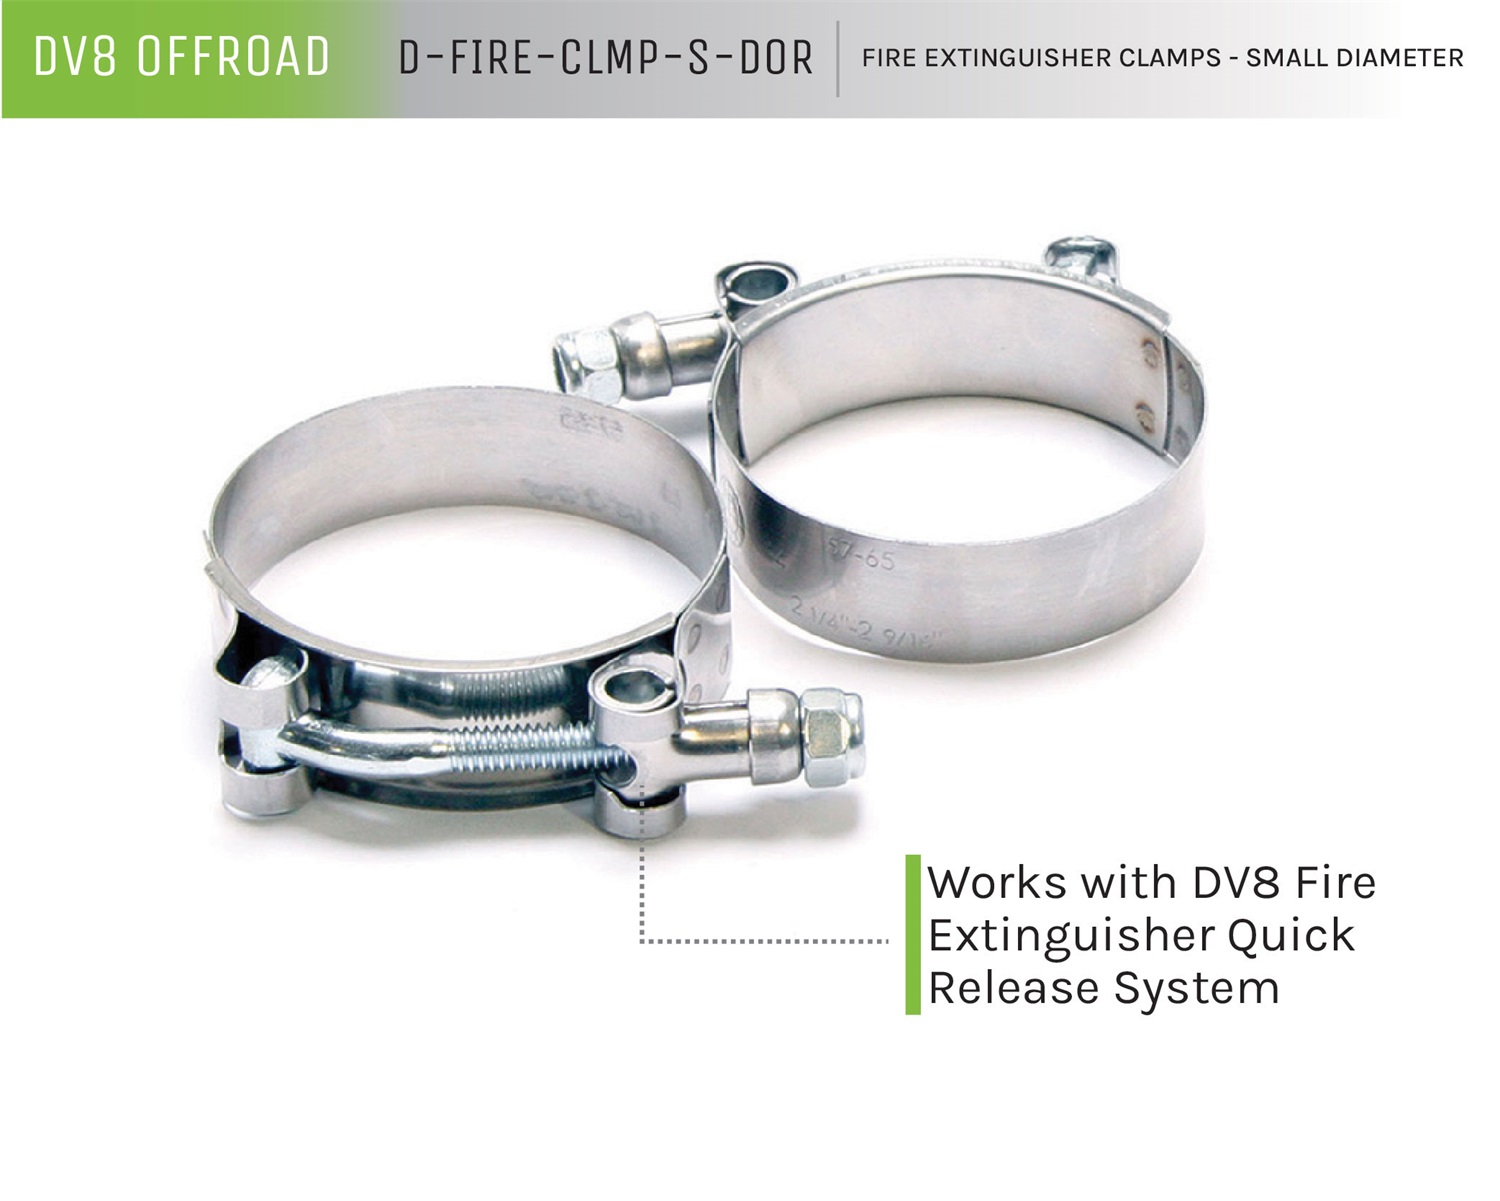 DV8 Offroad D-FIRE-CLMP-S-DOR Fire Extinguisher Clamps